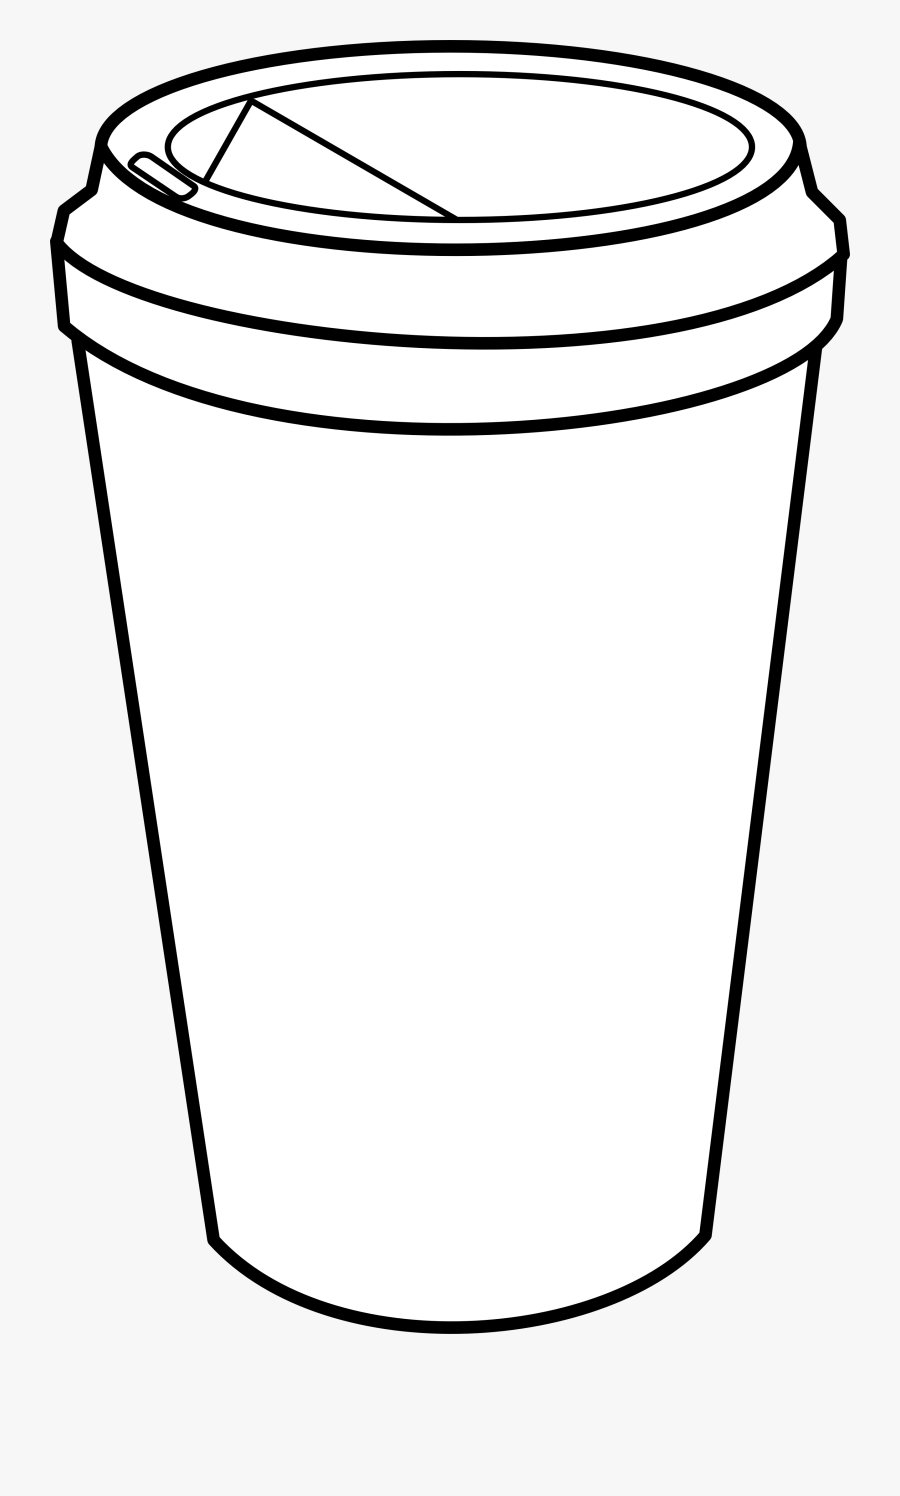 Go Coffee Cup Clipart, Transparent Clipart